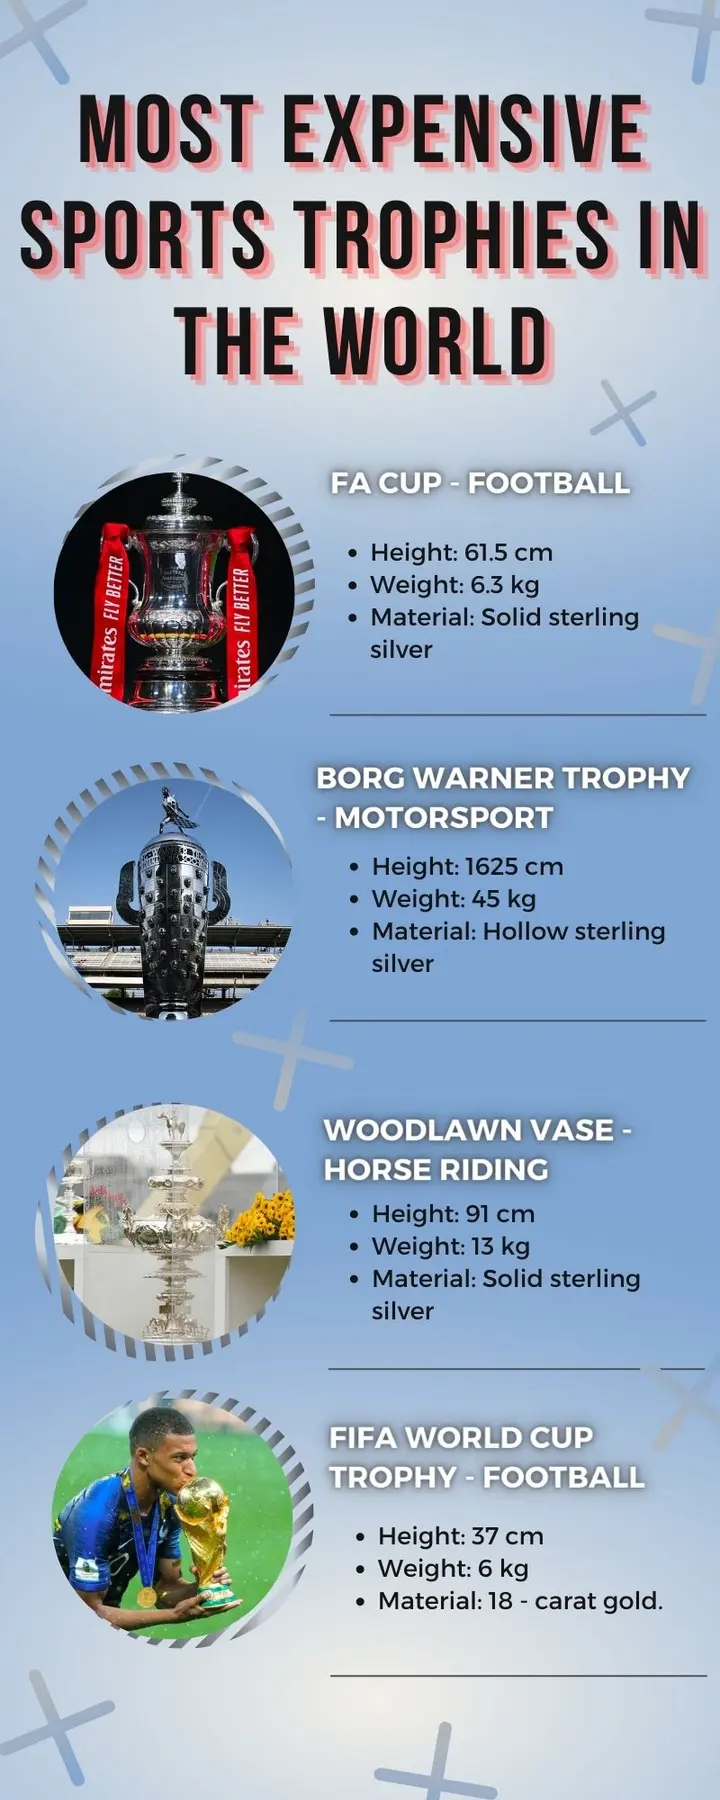 World Cup trophy: Weight, height, size and history of the prize